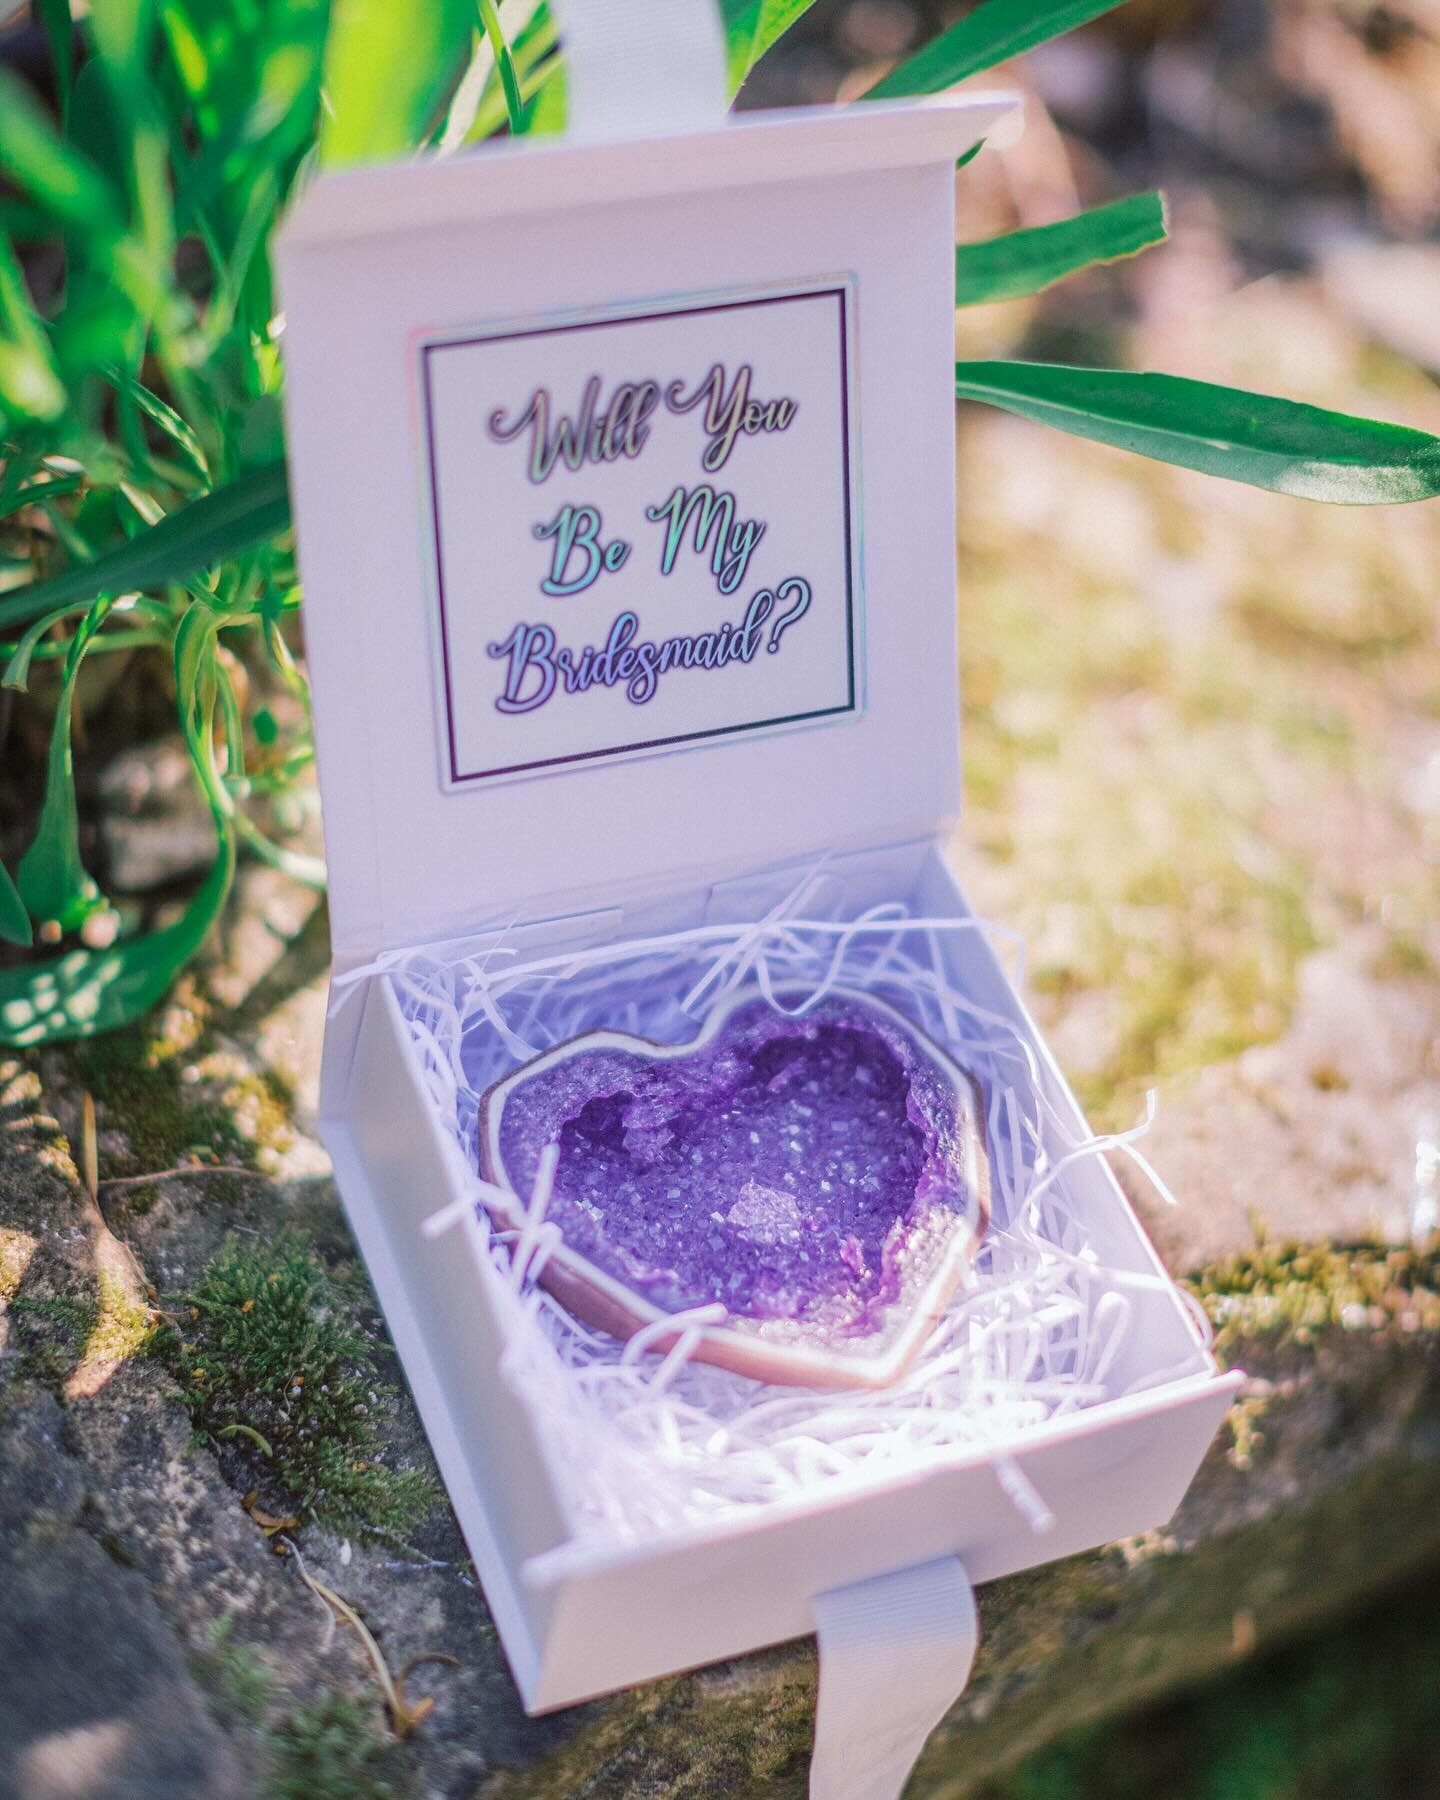 Planning your big day? Our gorgeous &amp; delicous heart crystal sweets are the best way to ask your besties that all important question! 💖

Photography by @sanshinephoto ✨